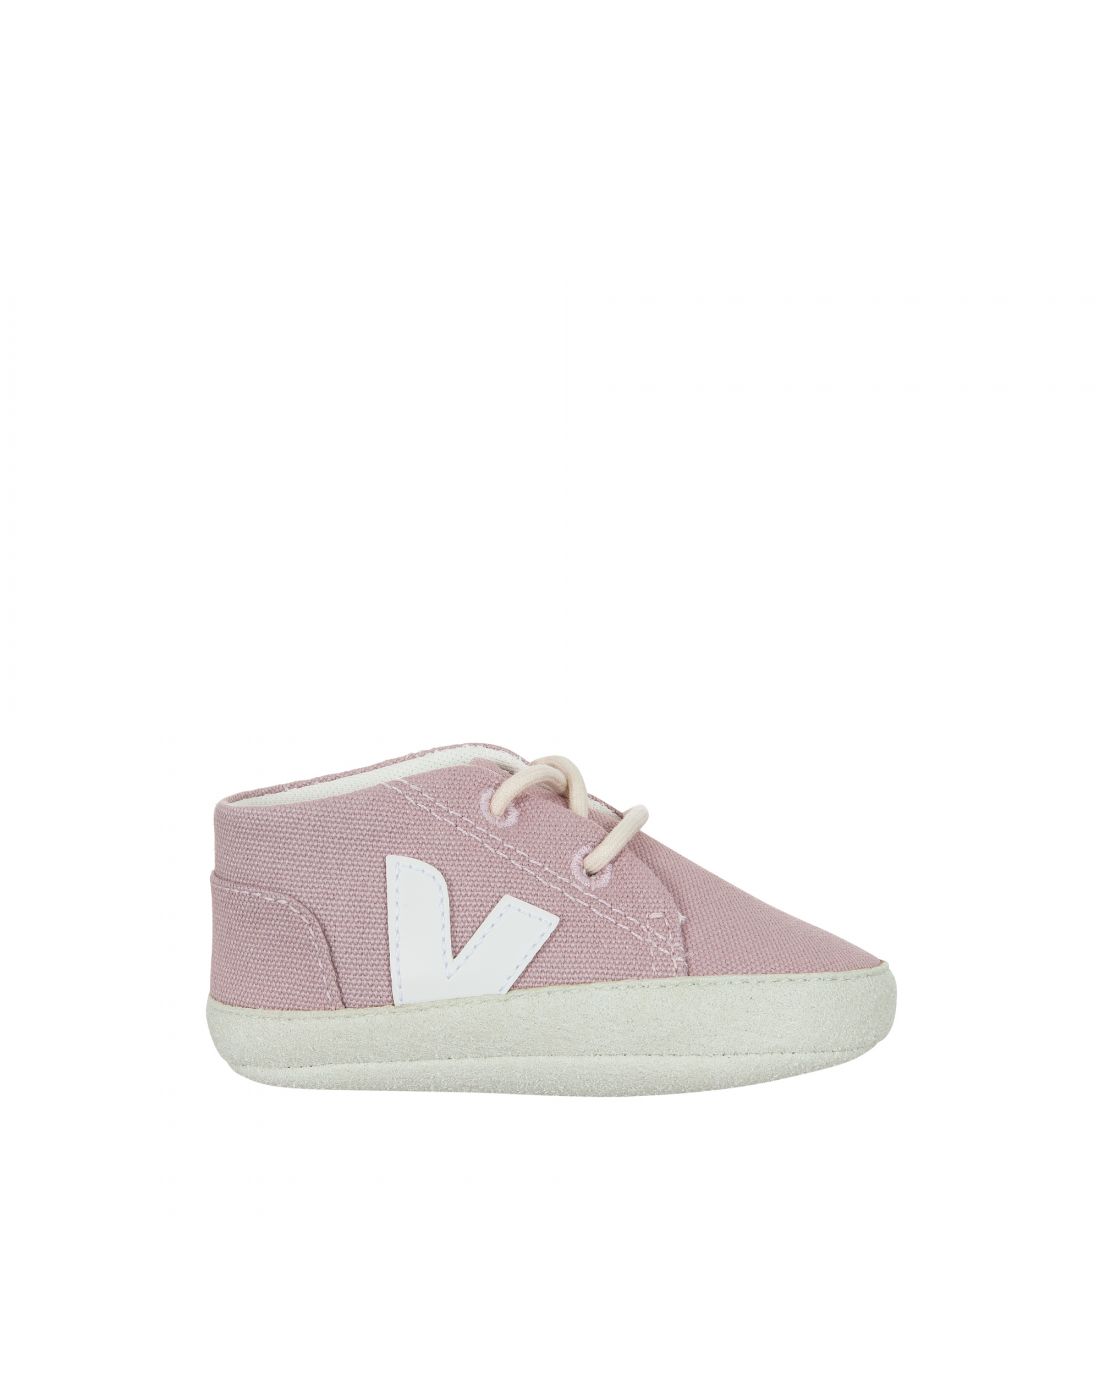 Veja Baby's Sneakers Shoes